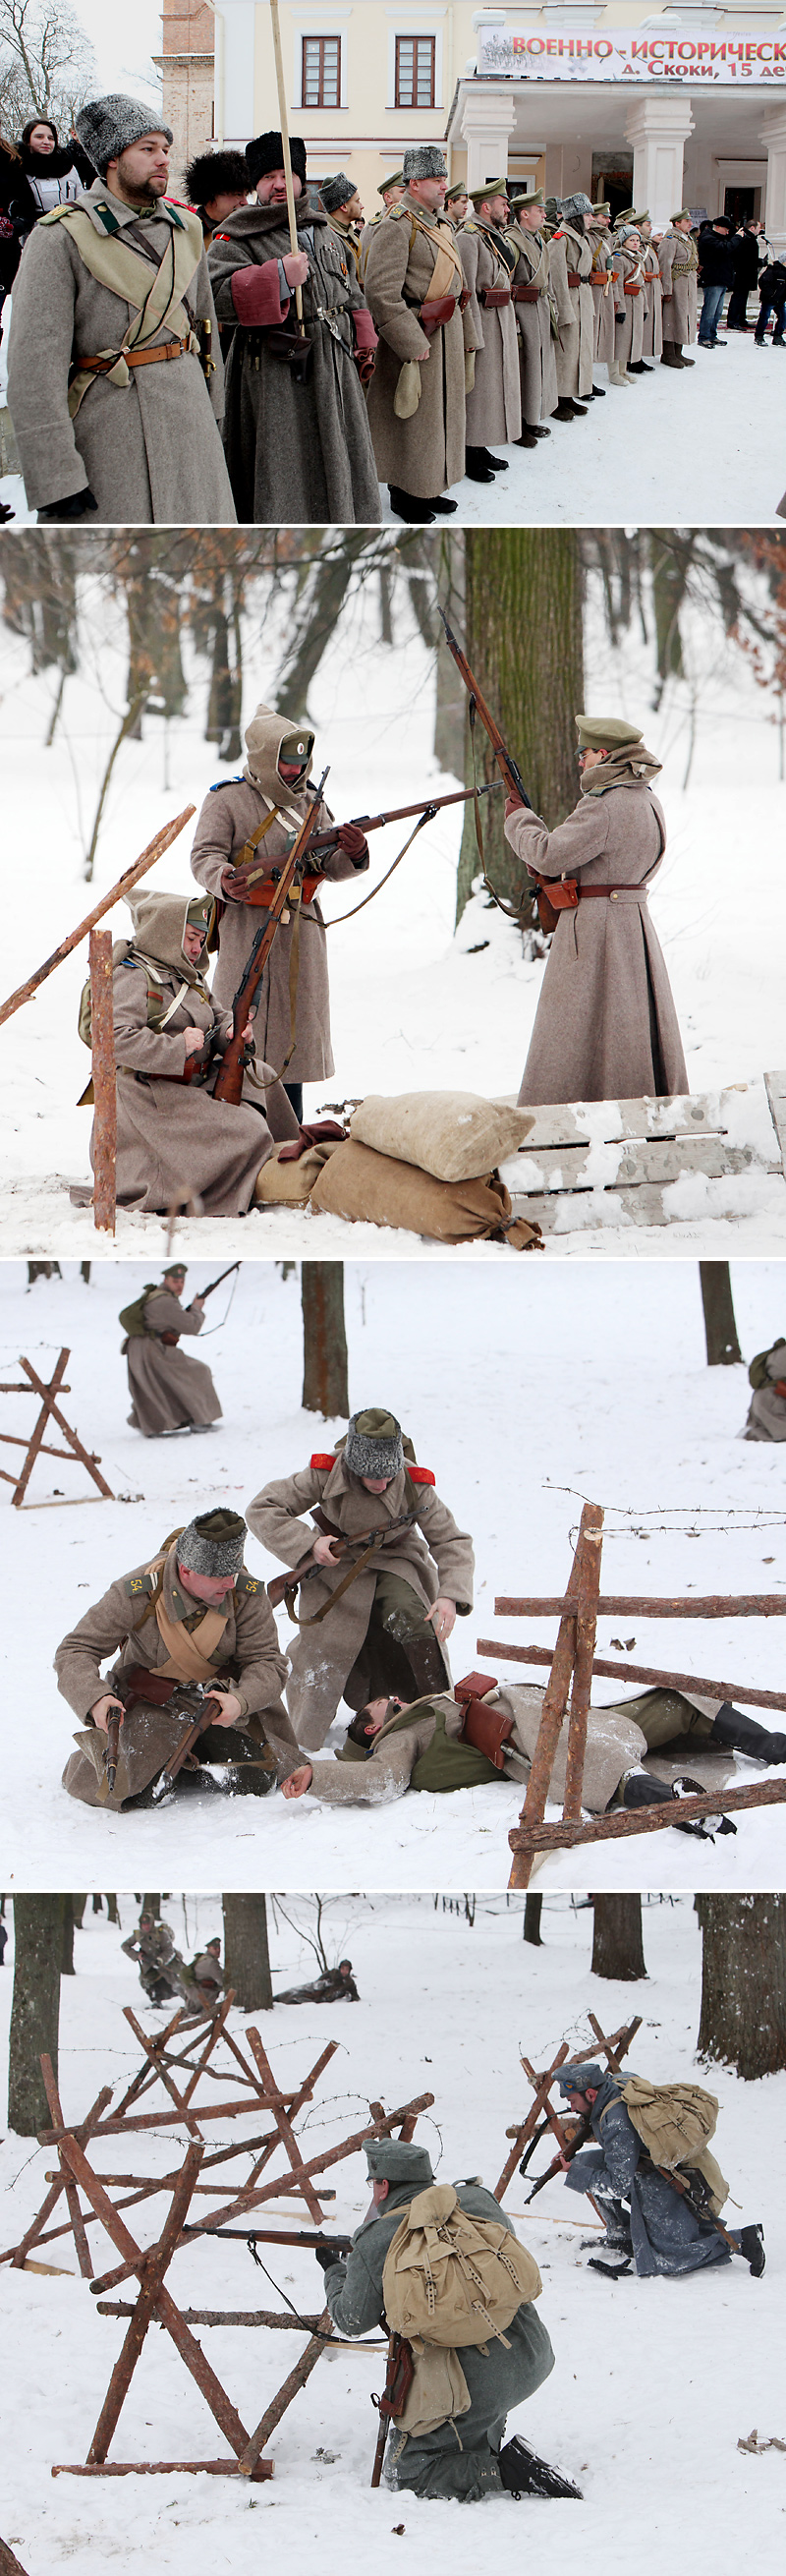 World War One events have been recreated in the Nemtsevichs estate